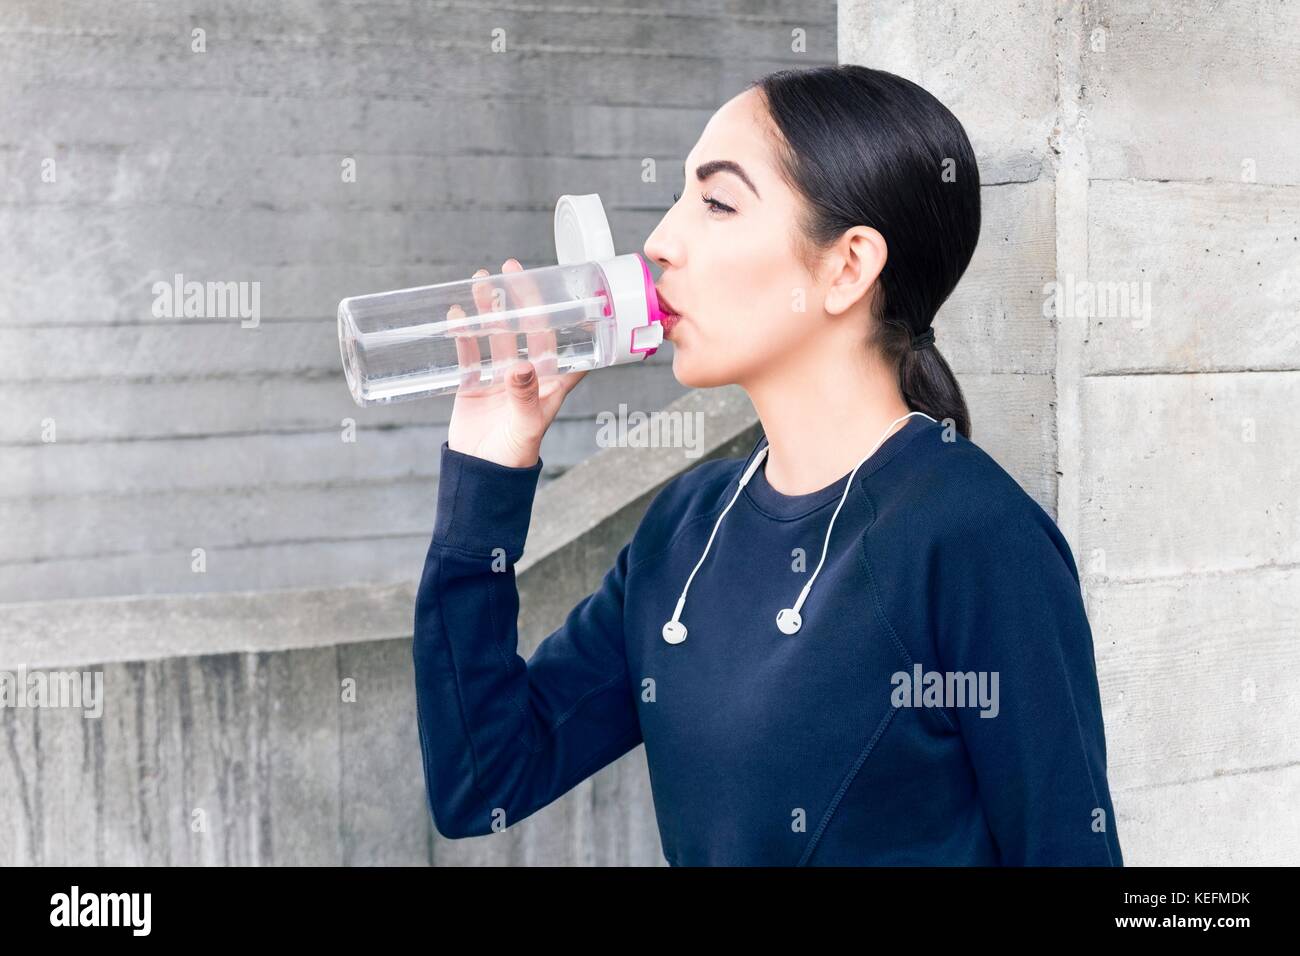 MODEL RELEASED. Young woman drinking water from bottle. Stock Photo